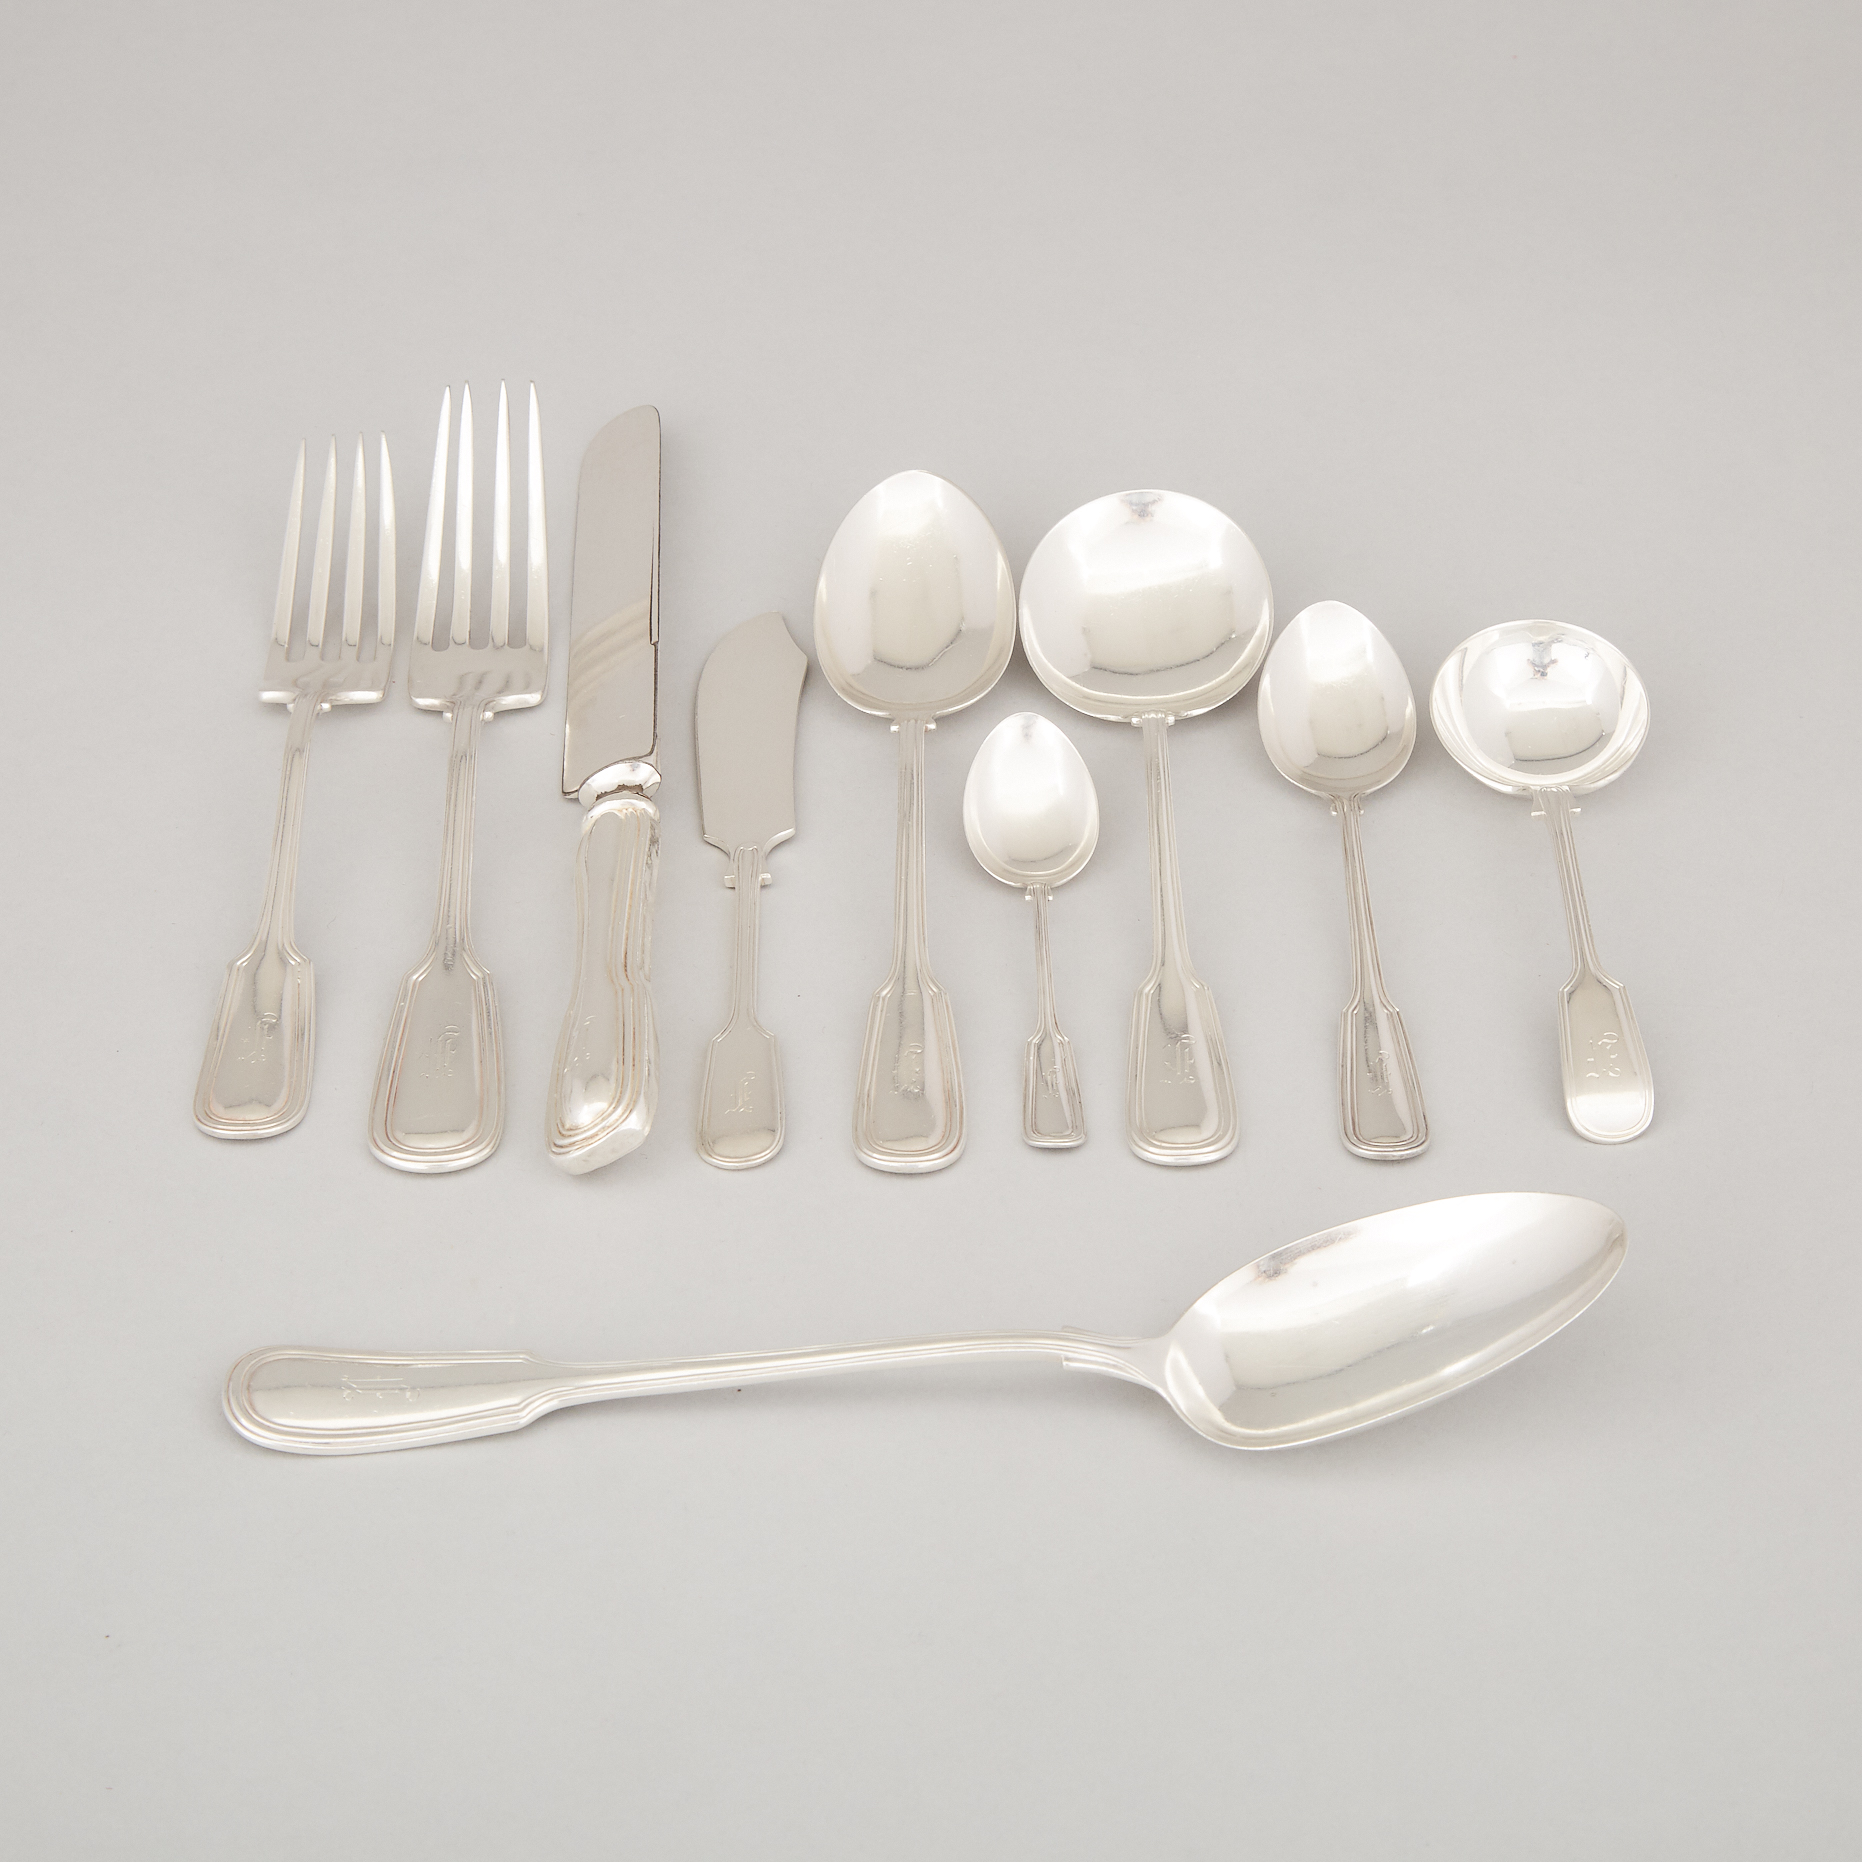 Canadian and English Silver Fiddle and Thread Pattern Flatware, J.E. Ellis & Co., Toronto, Ont. and Harrison Bros. & Howson of Sheffield for Birks-Ellis,  20th century